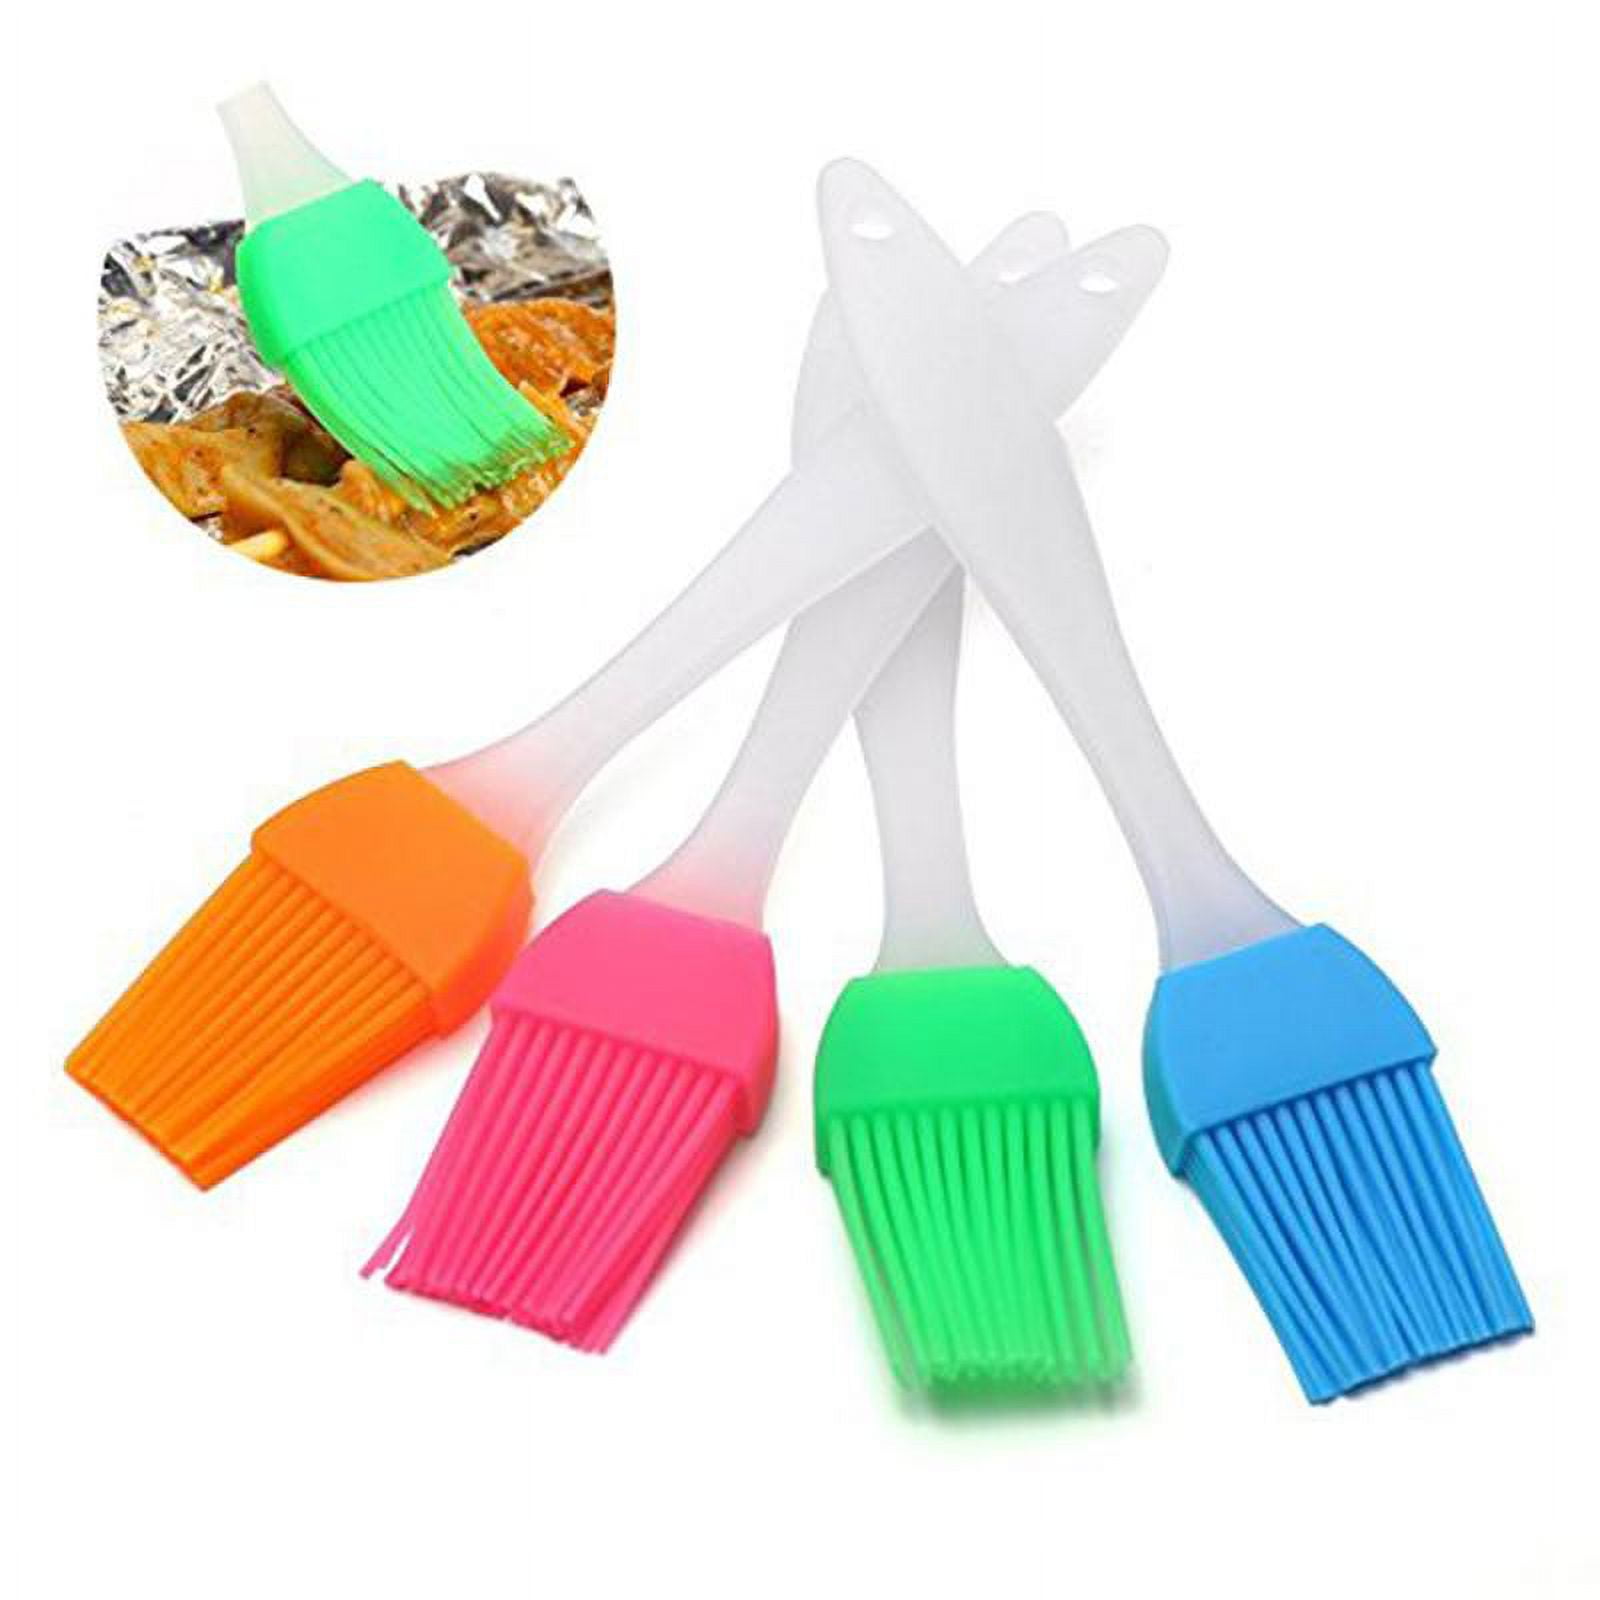 8pcs Silicone Basting Pastry Brush Cooking Brush For Oil Sauce